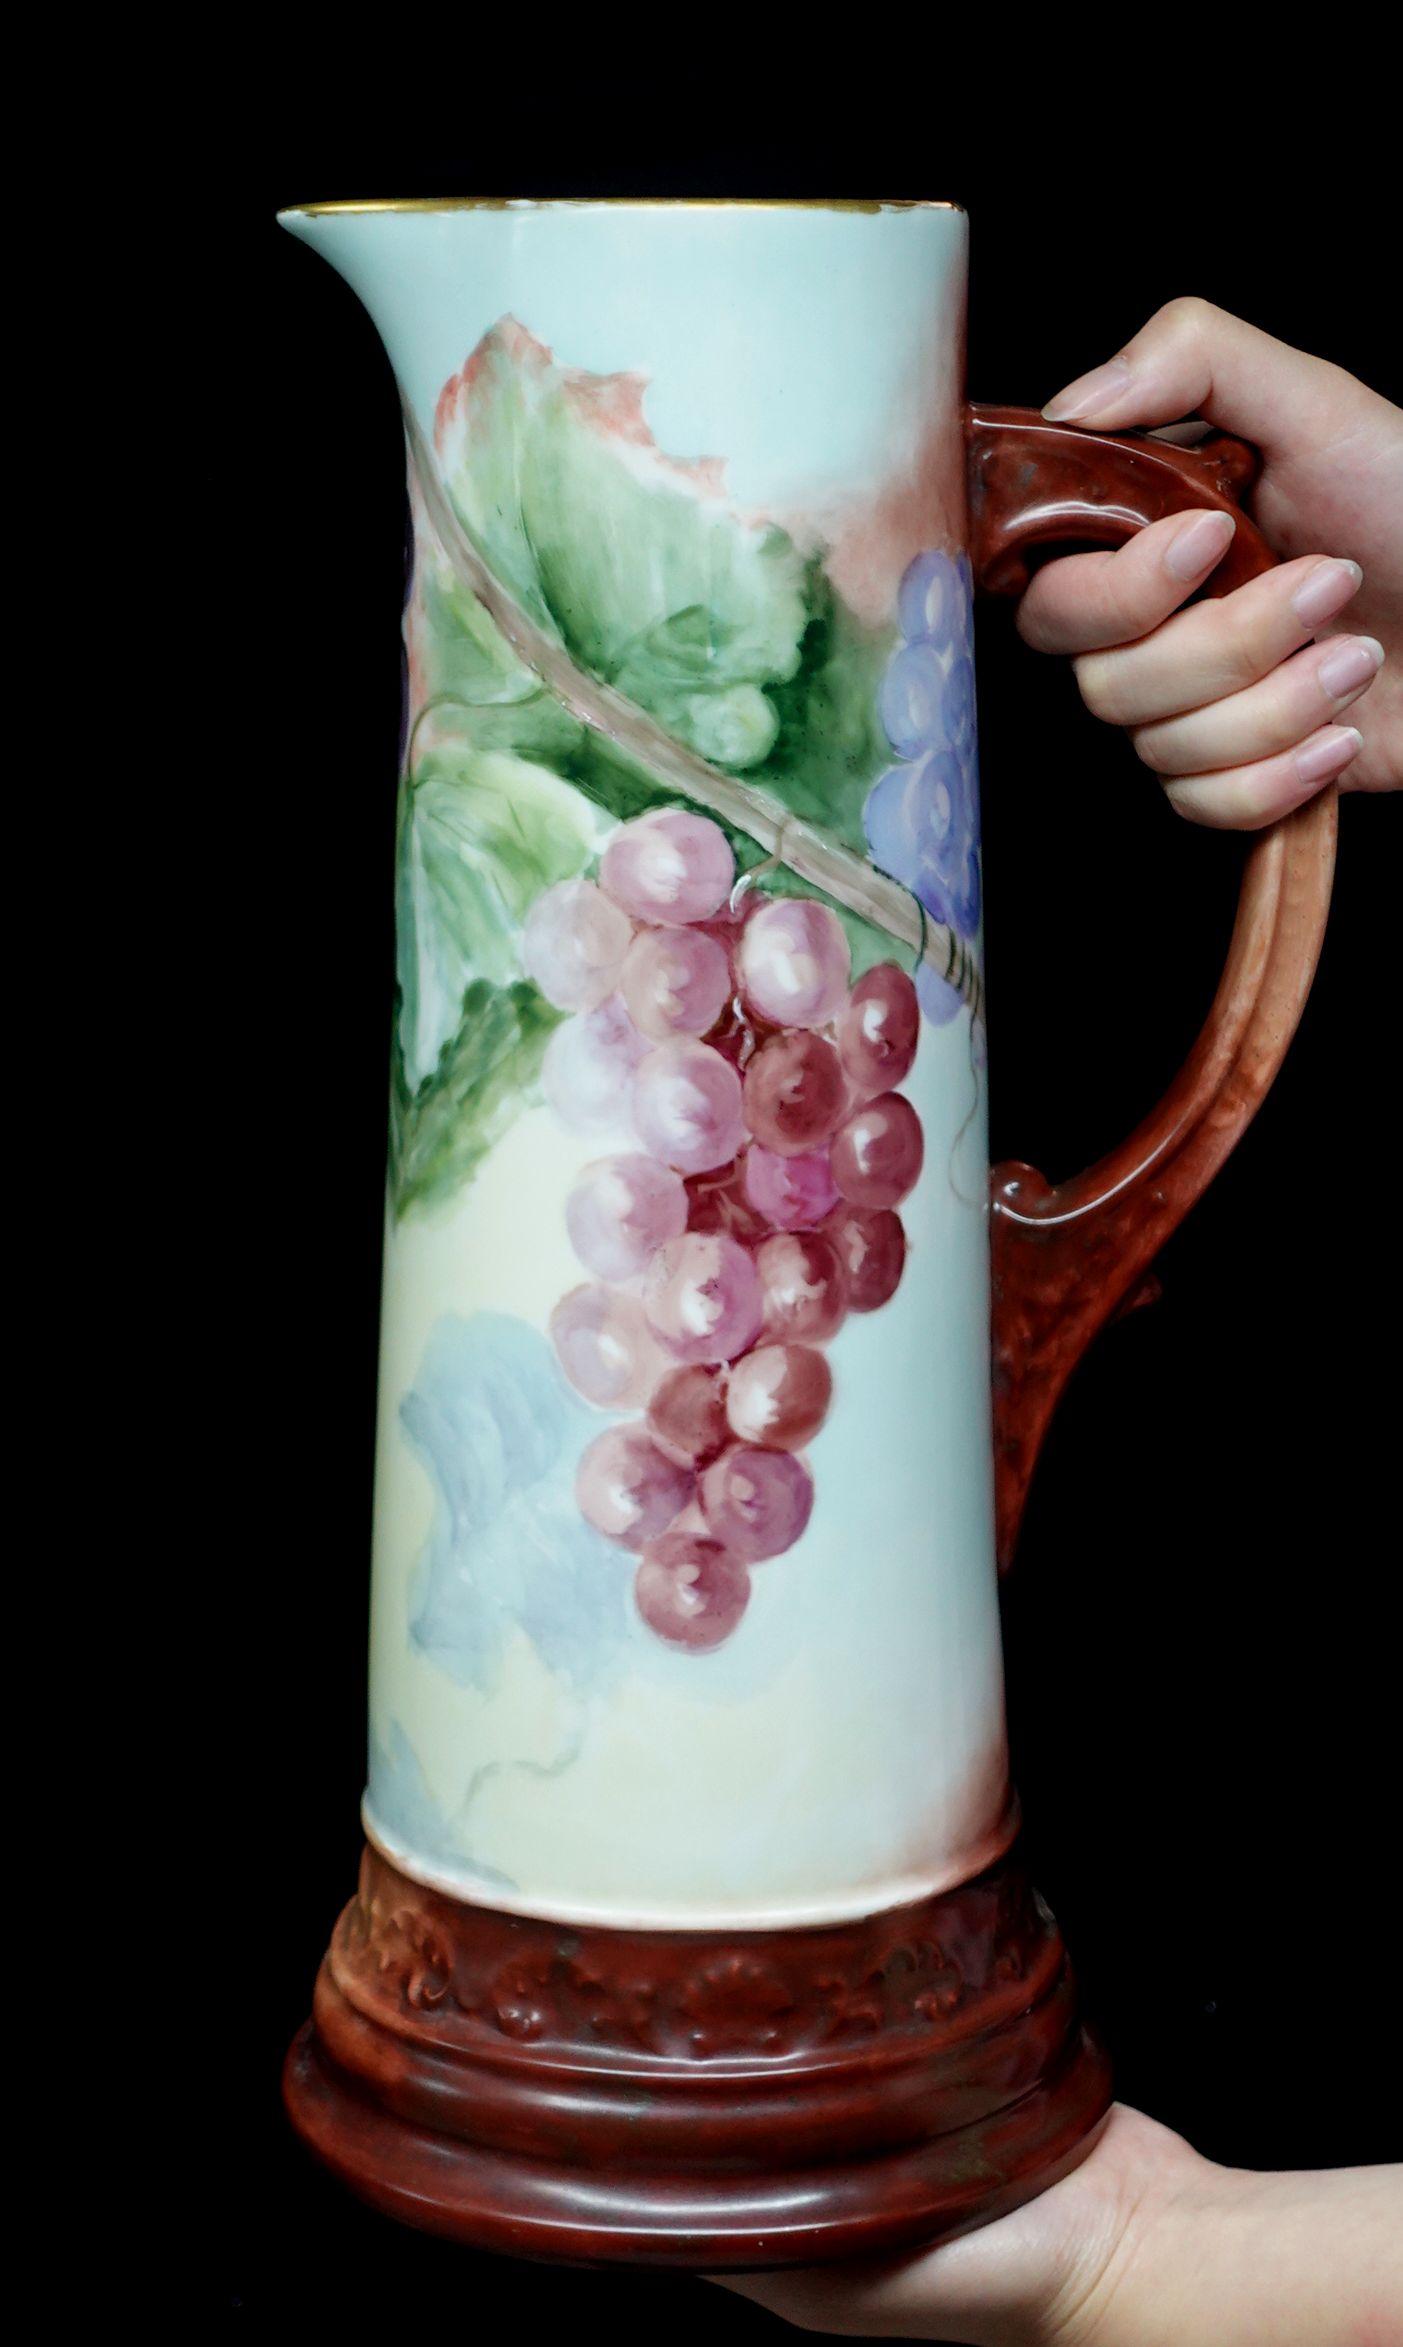 A wonderful antique large antique French Jean Pouyat Limoges figural porcelain decorated tankard offers a scalloped rim absolutely 100% hand-painted grapes in brown-red, purple, and rich green leaves, delicate arrangement of the composition, light